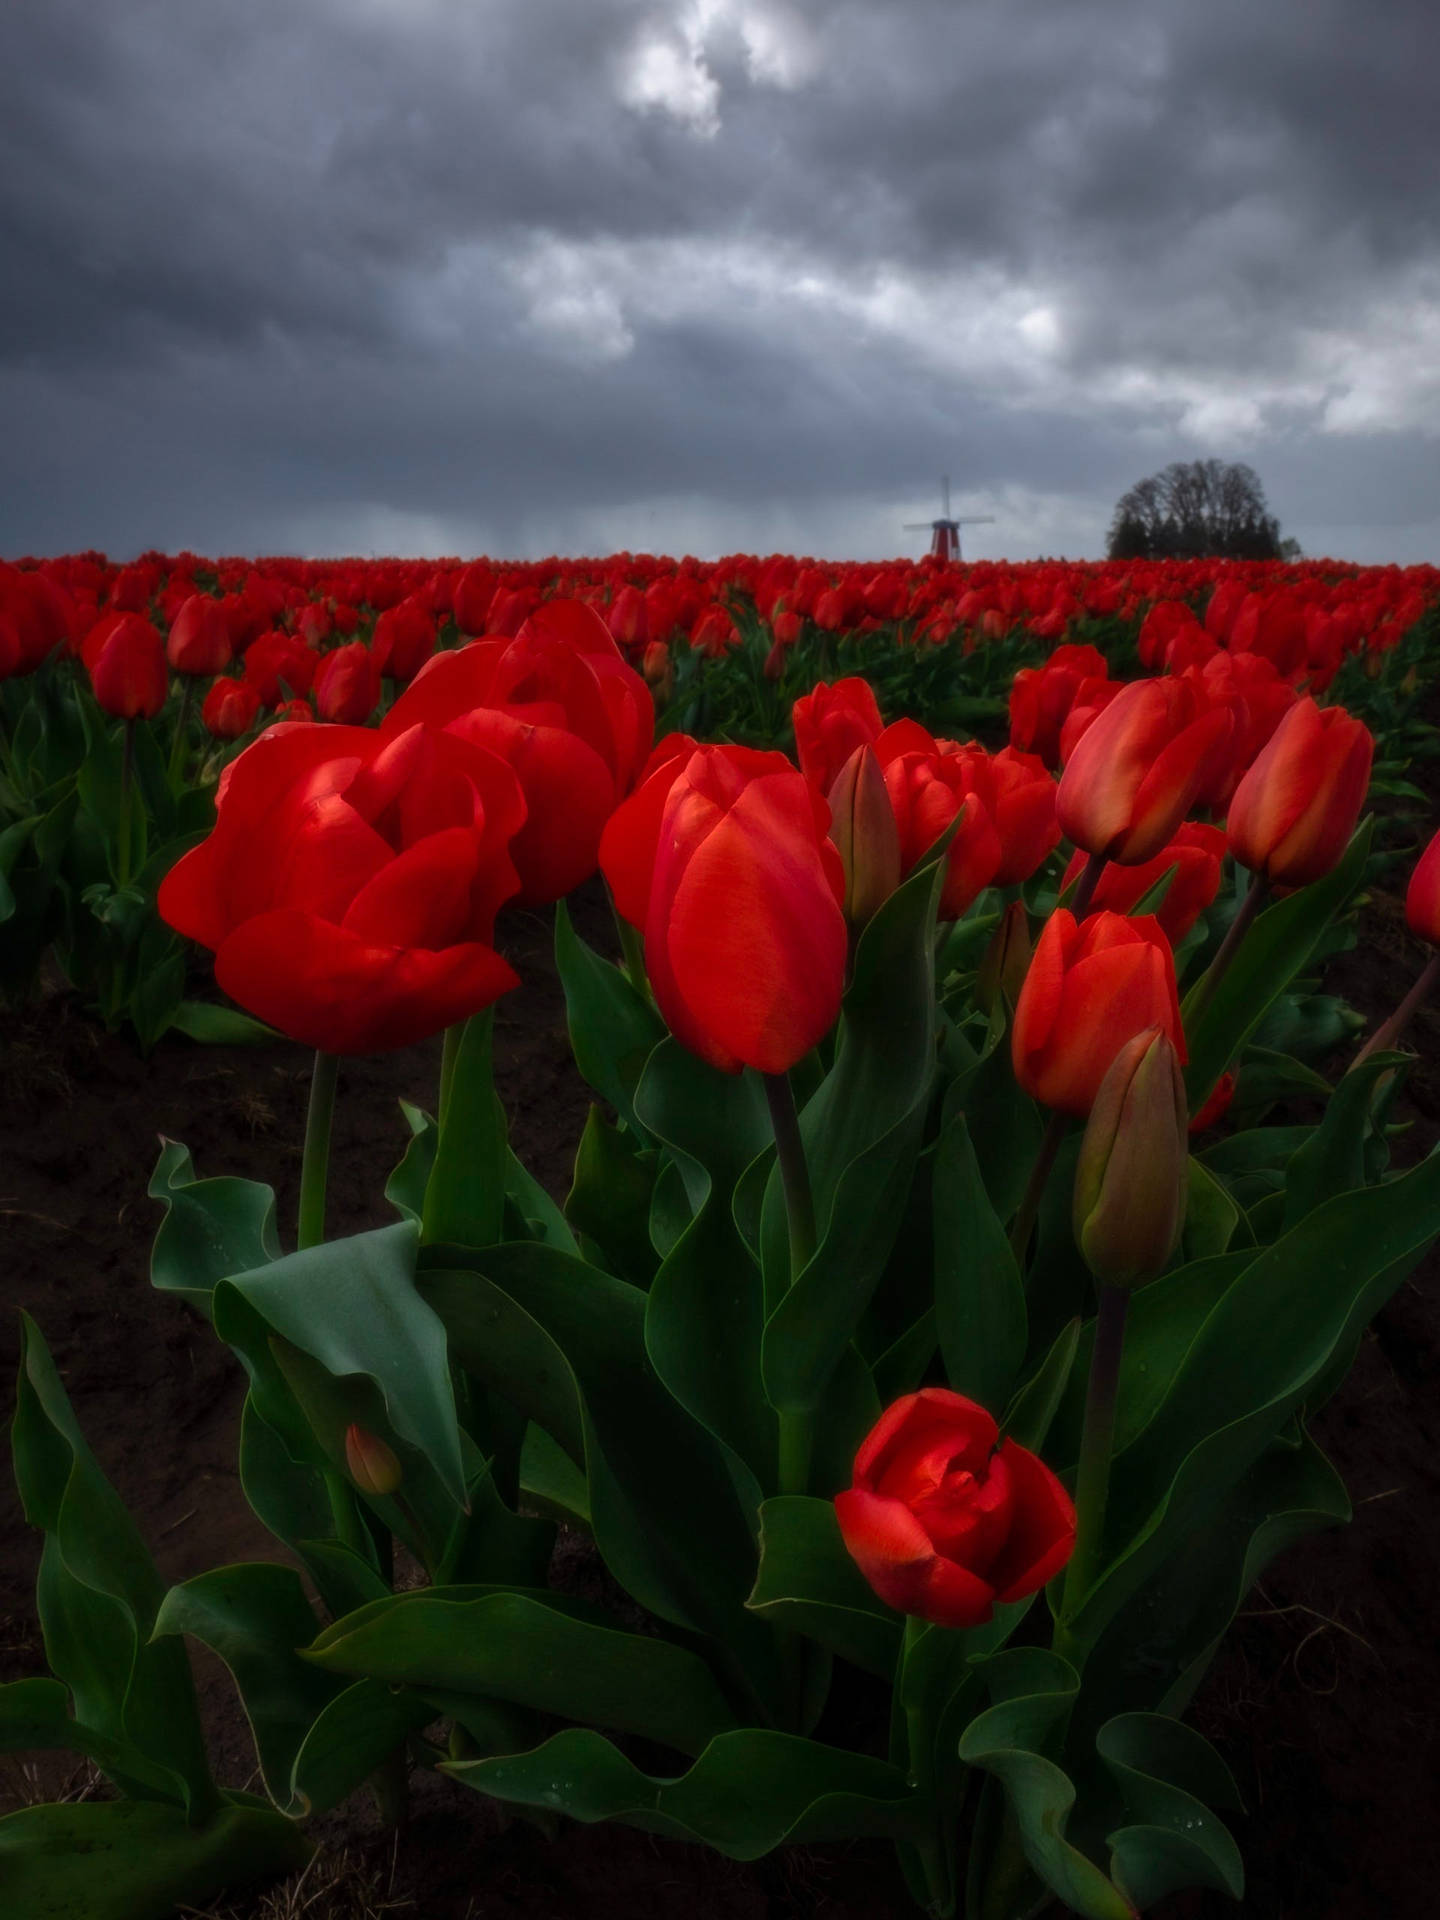 Brighten up your WhatsApp chats with this stunning field of tulips! Wallpaper